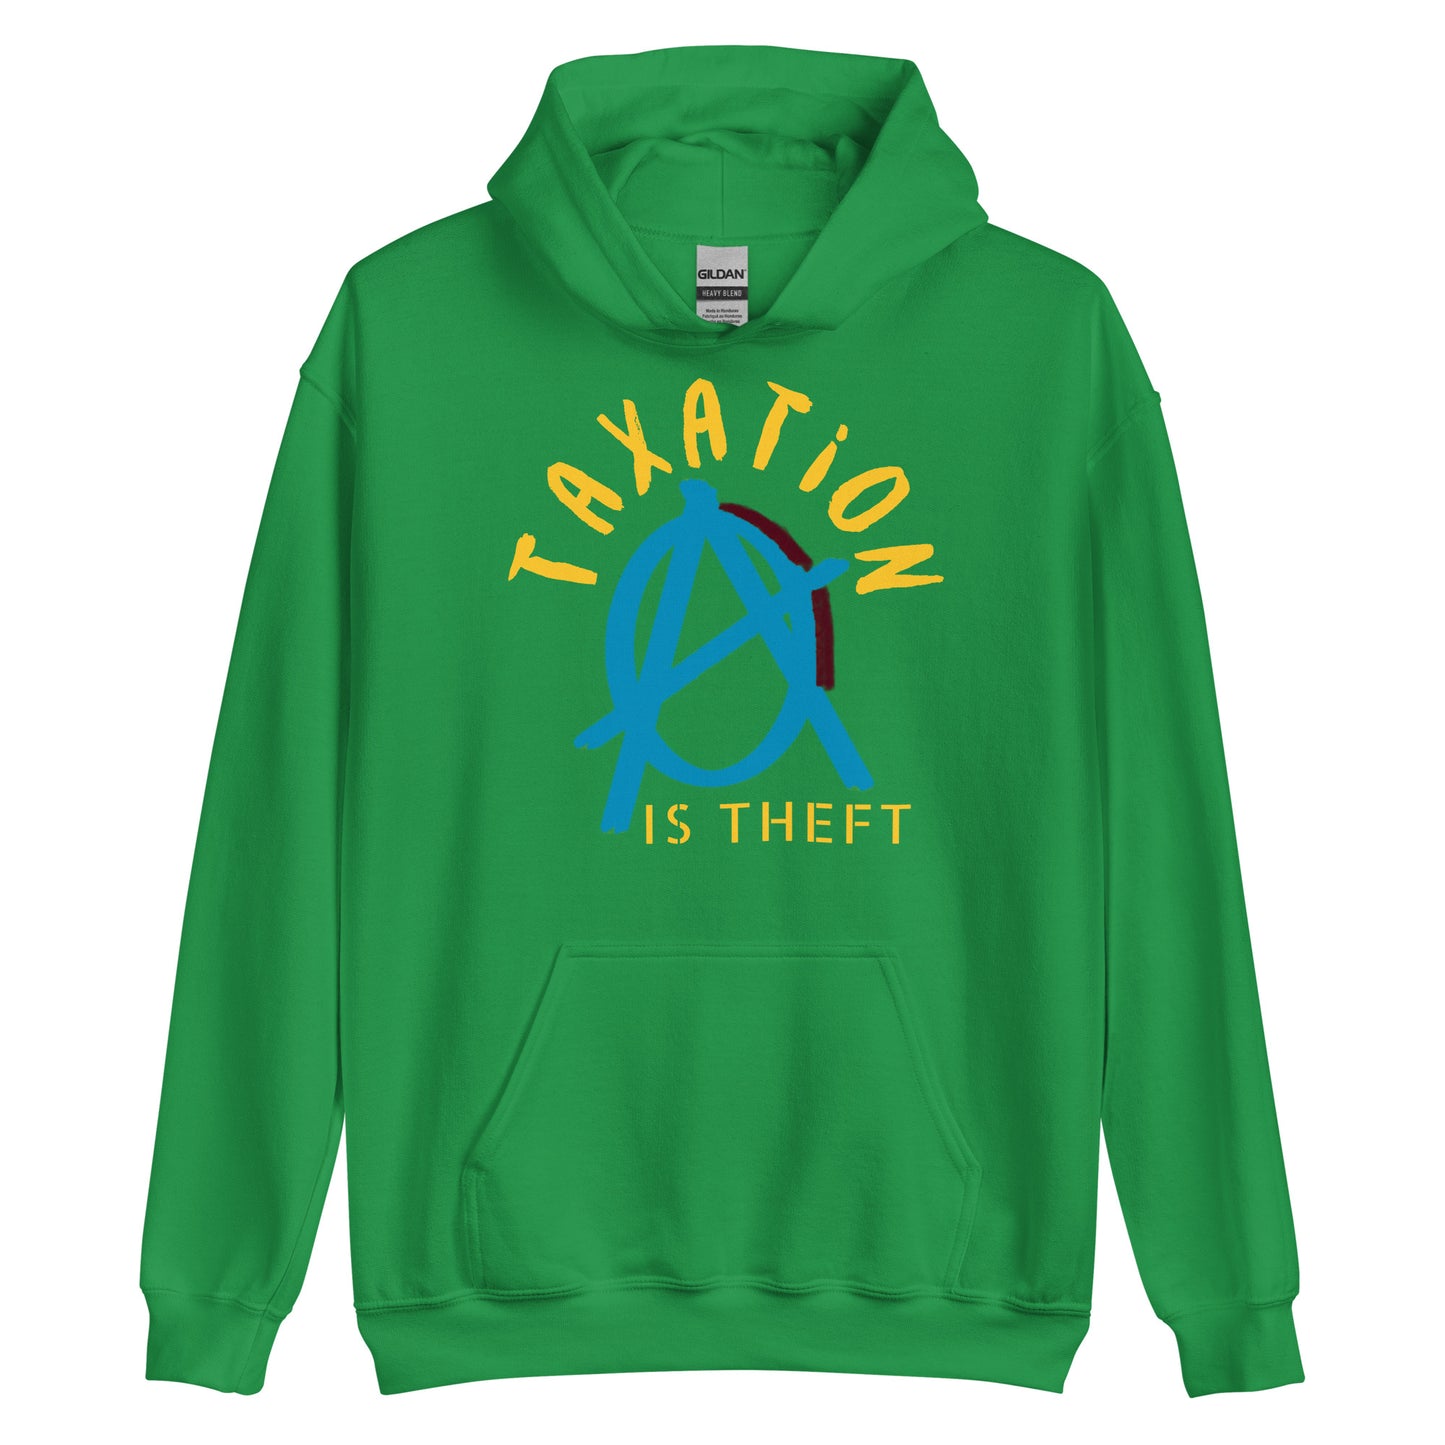 Anarchy Wear Blue "Taxation Is Theft" Hoodie